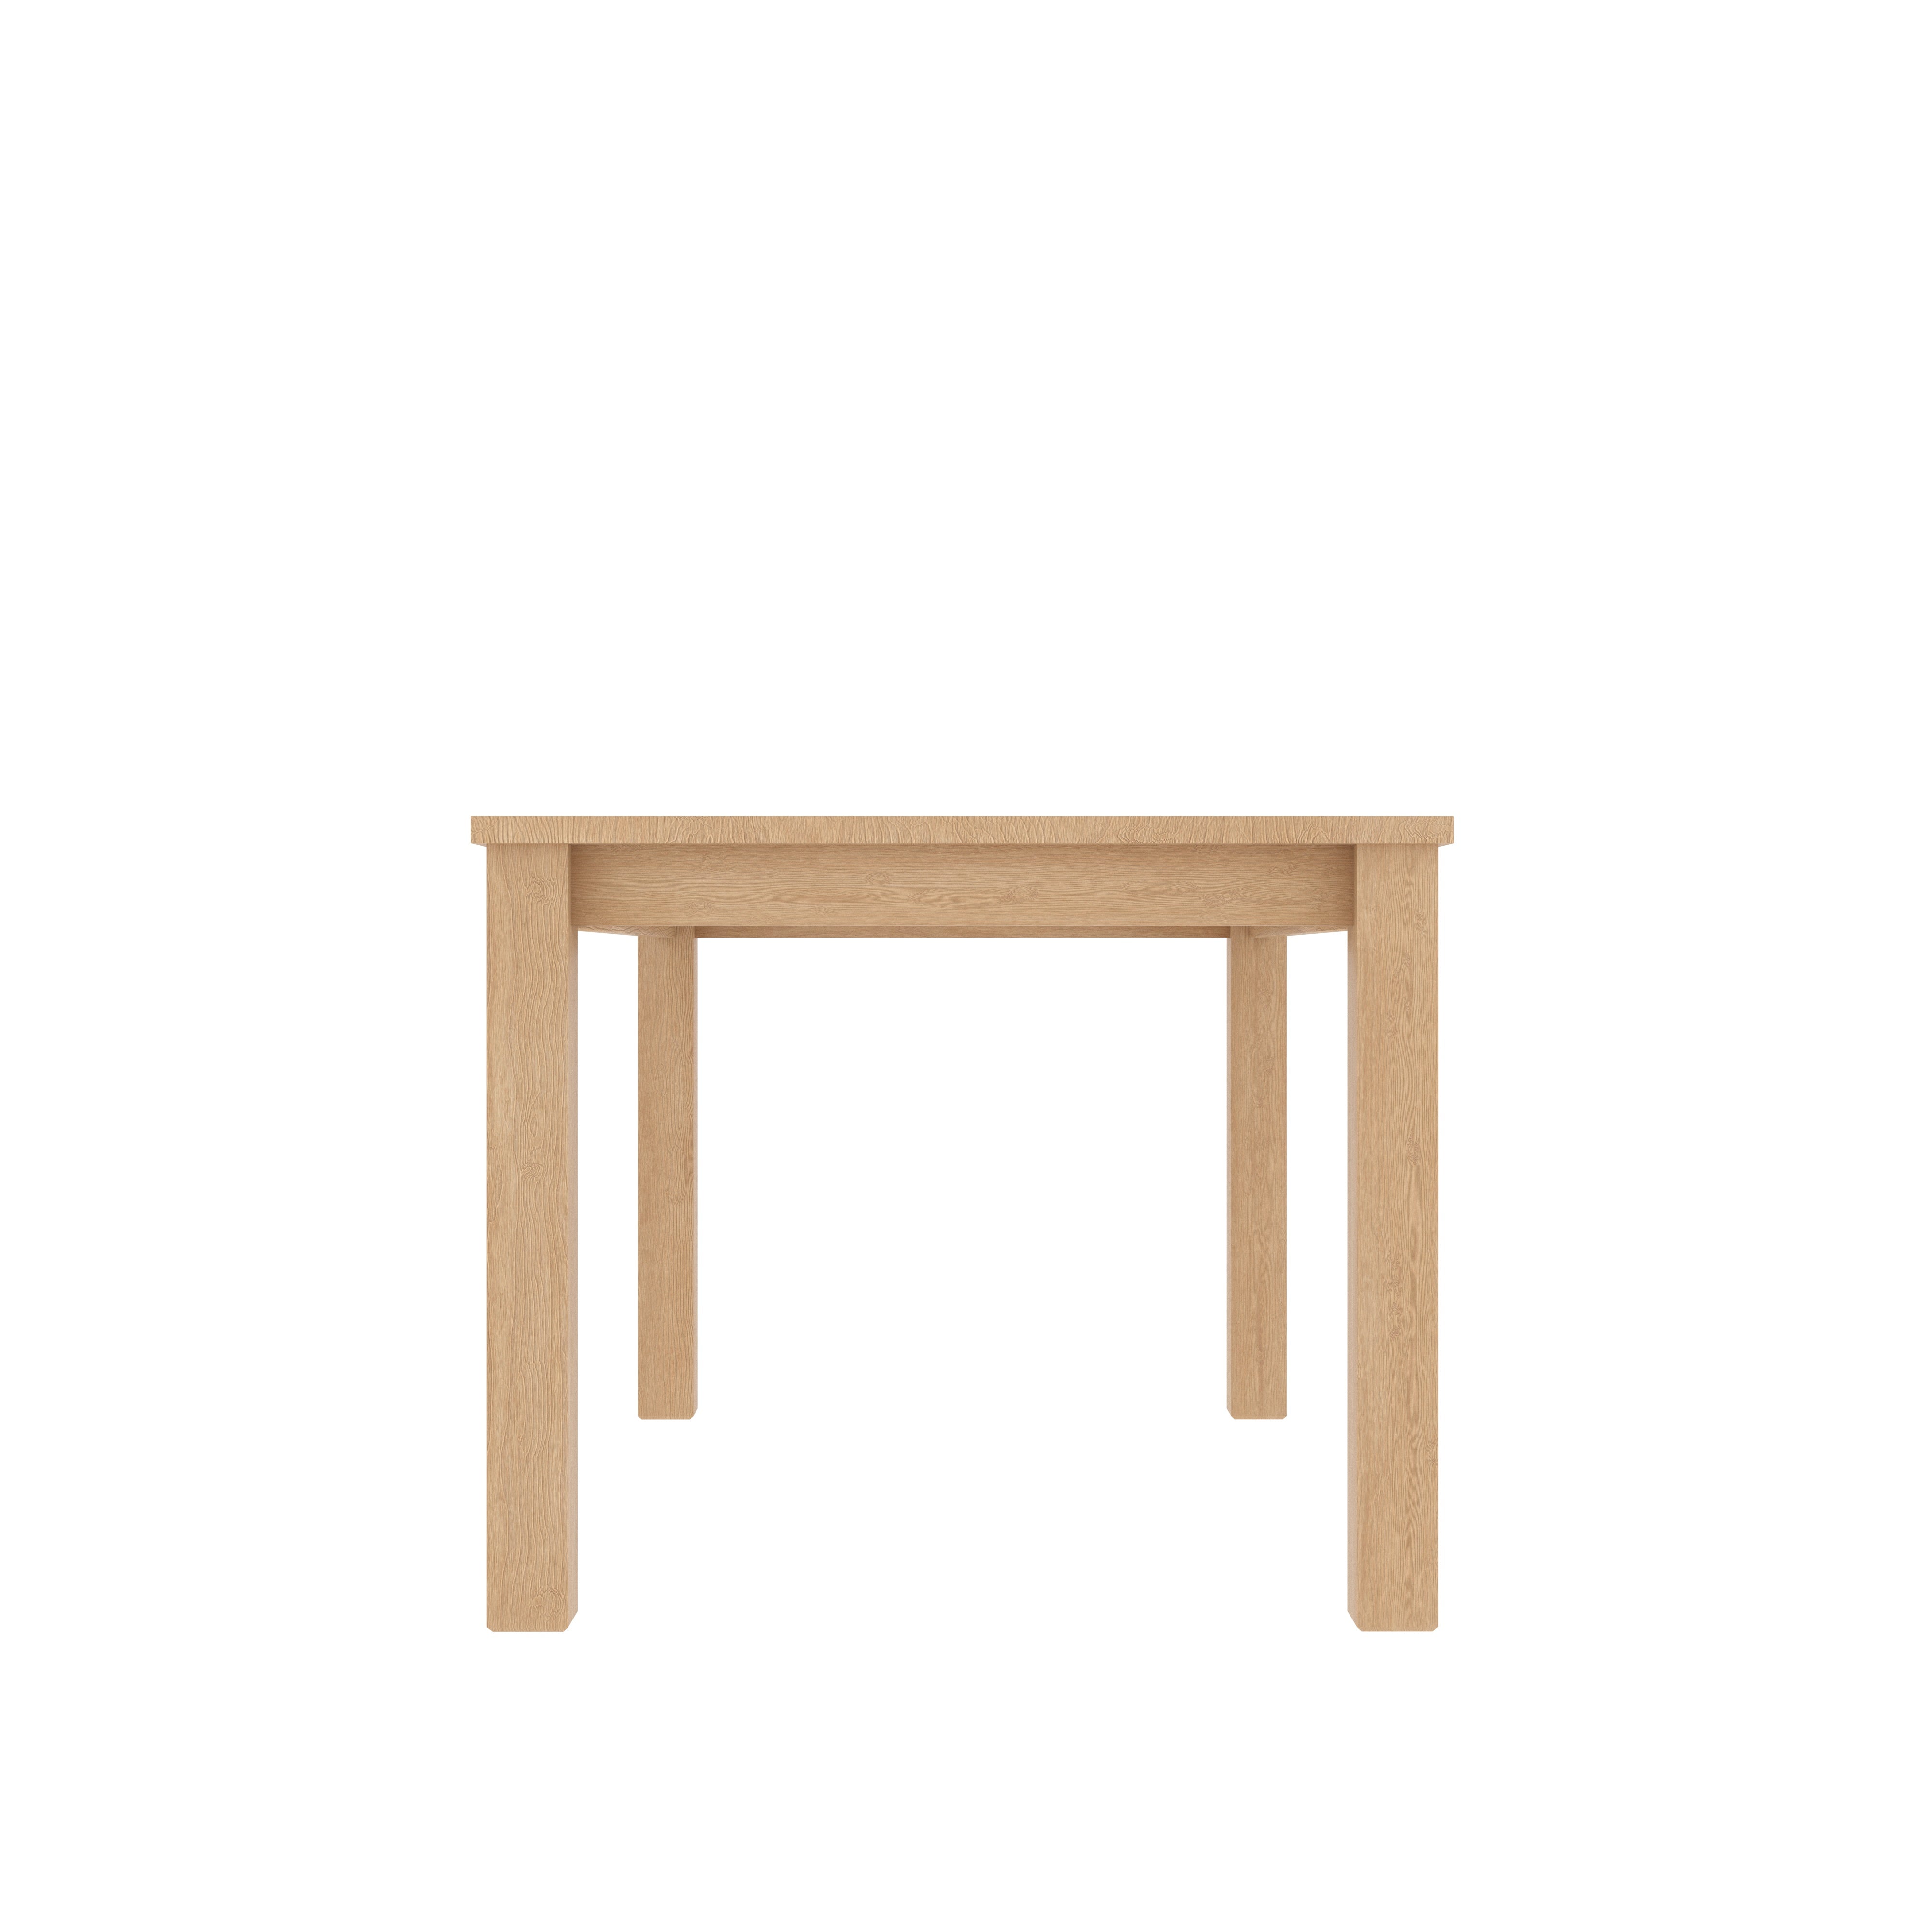 dining table with square legs and a simple design Dining Table